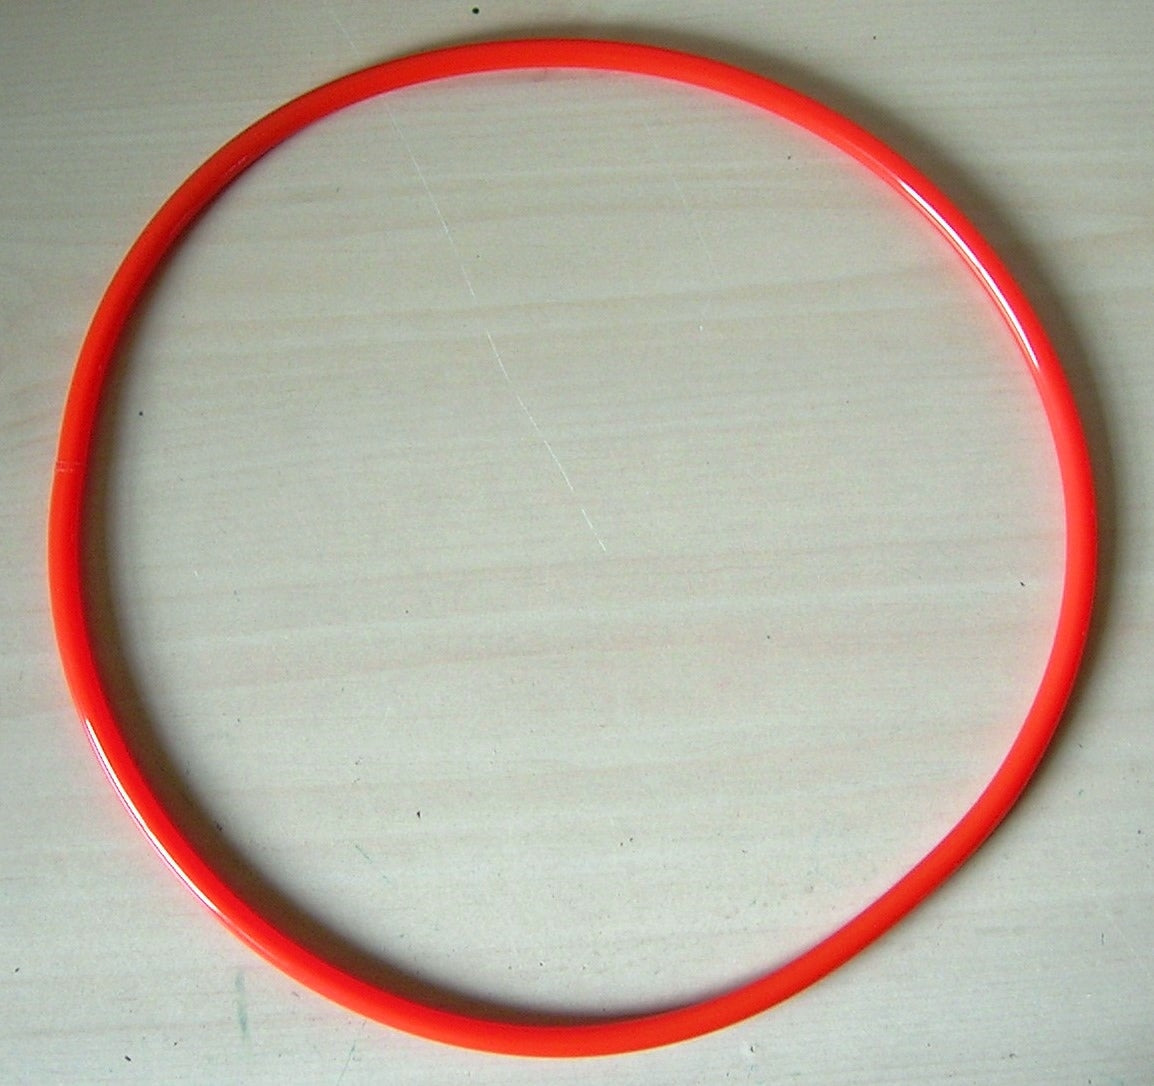 P/N RD549592800 Replacement Round Drive BELT for RED DEVIL Paint Shaker